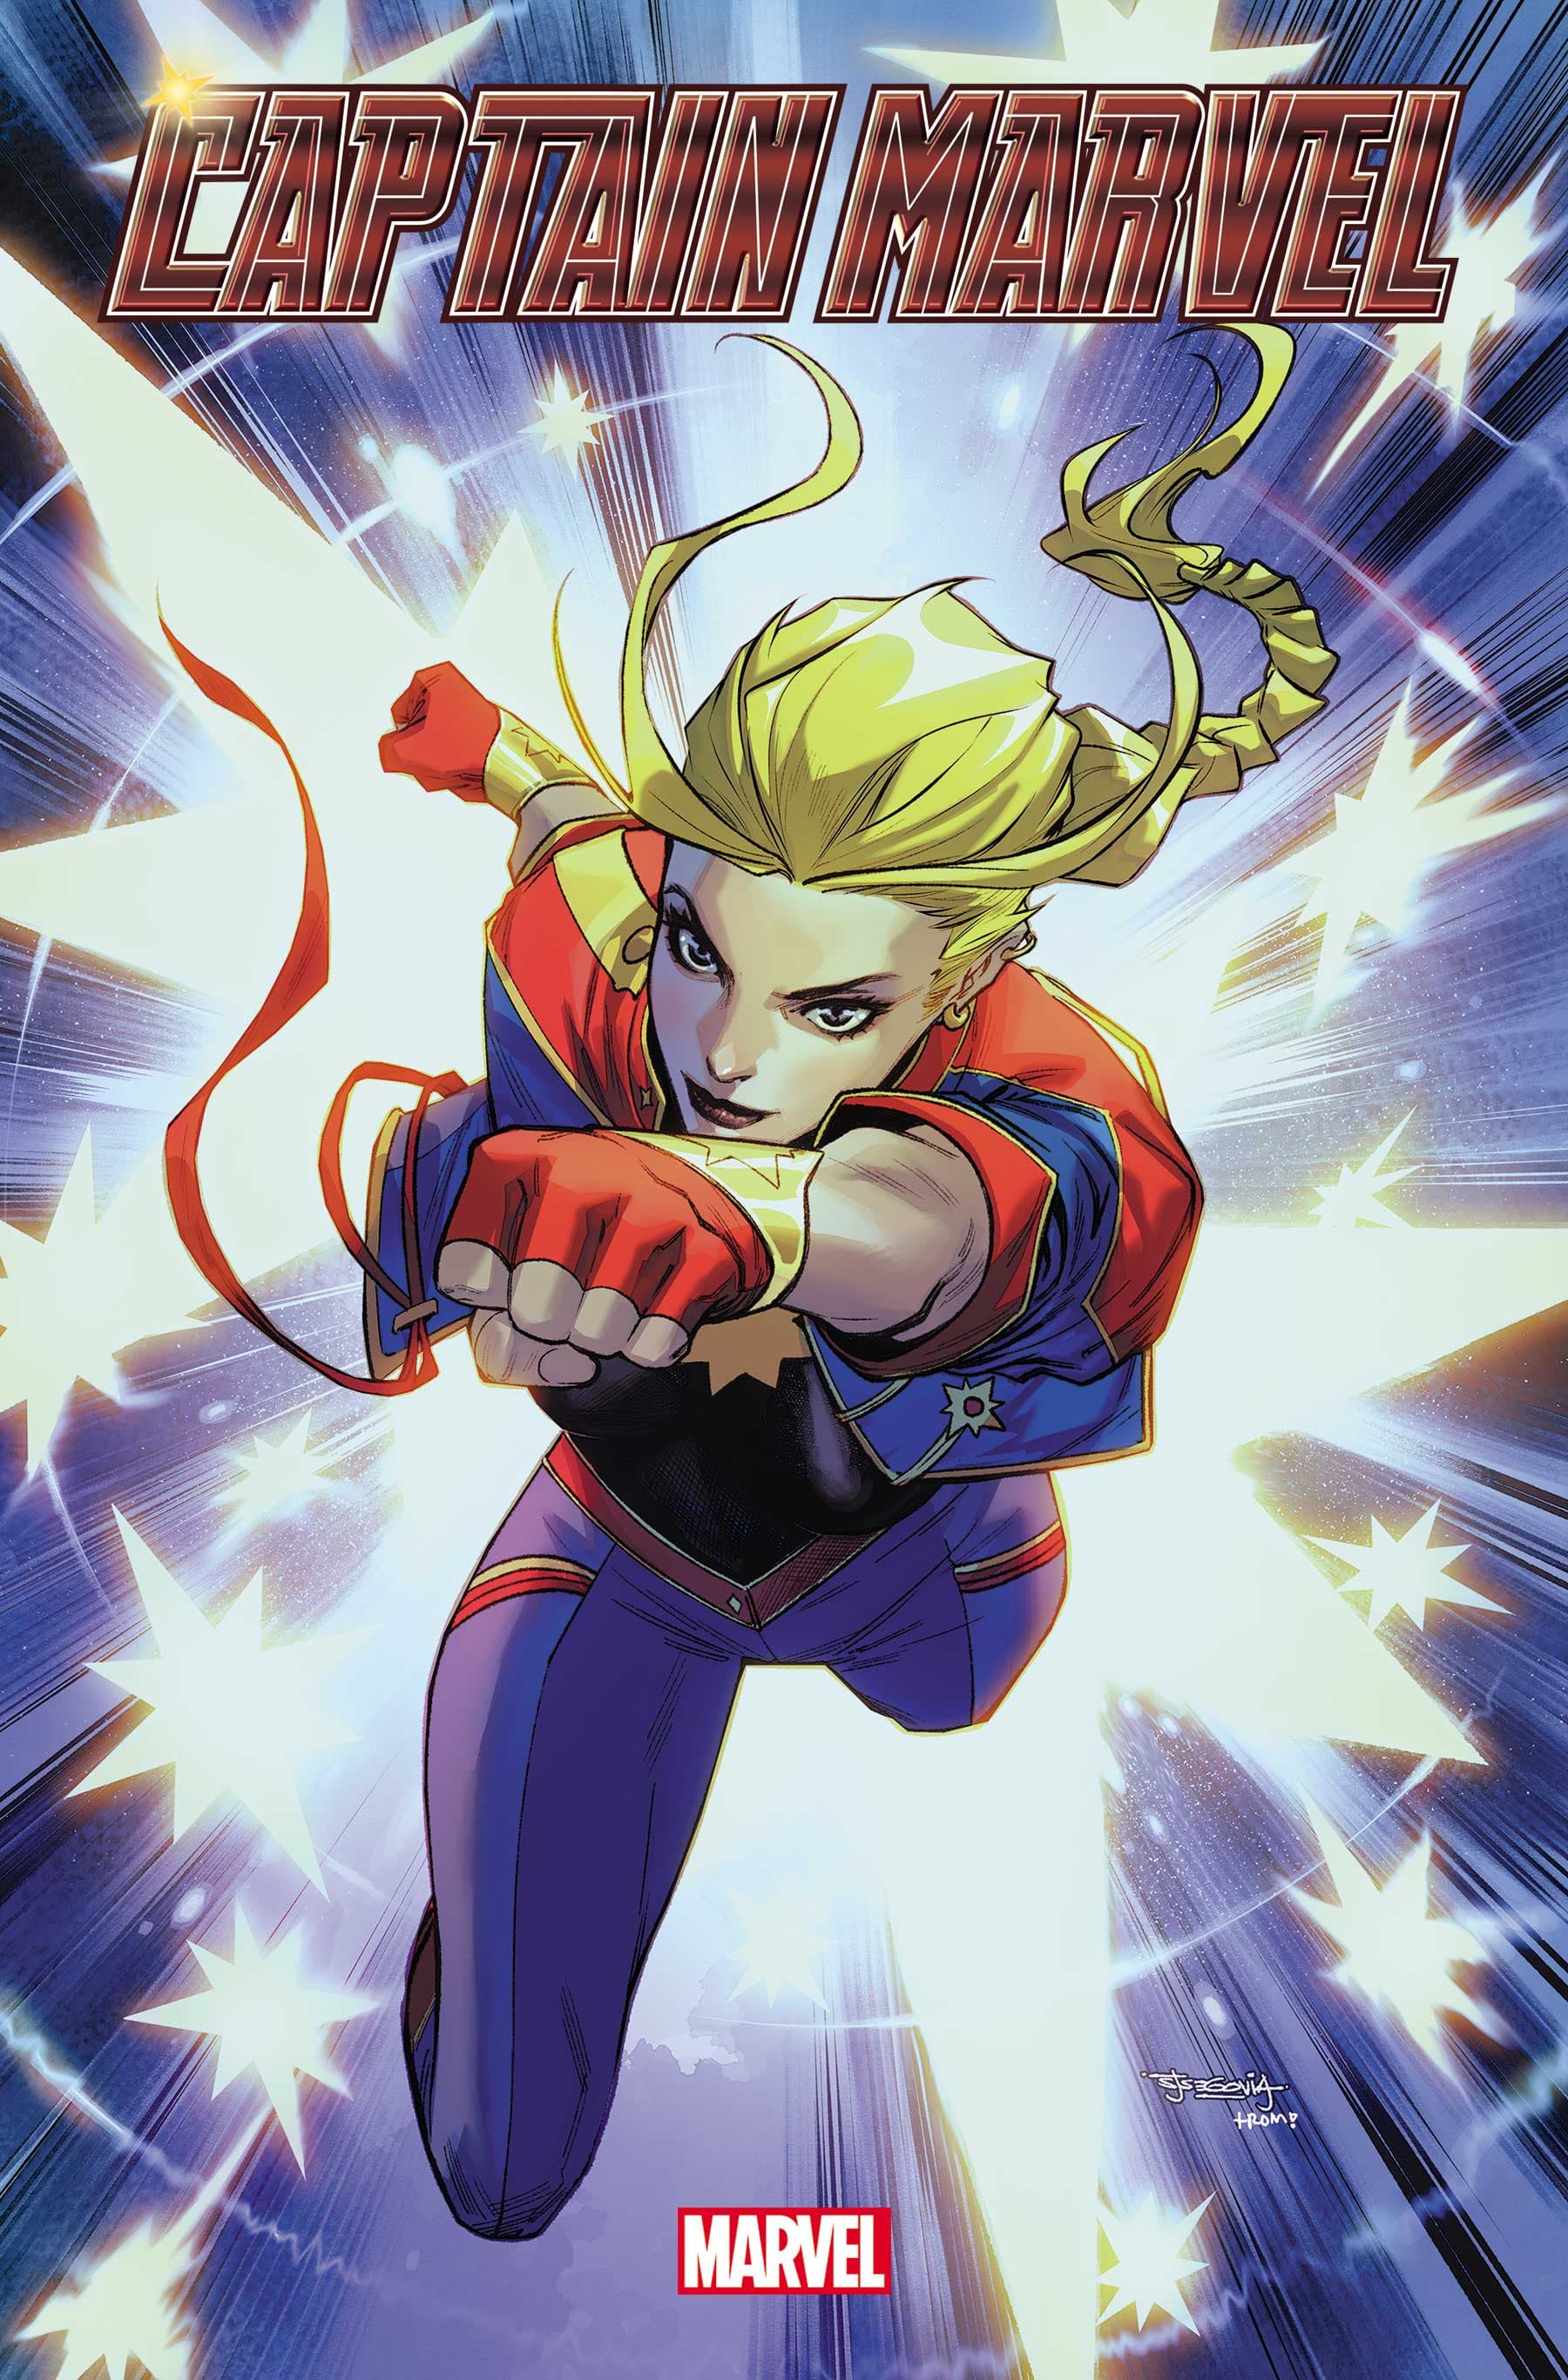 Captain Marvel exclusive: Kelly Thompson unveils a new look for